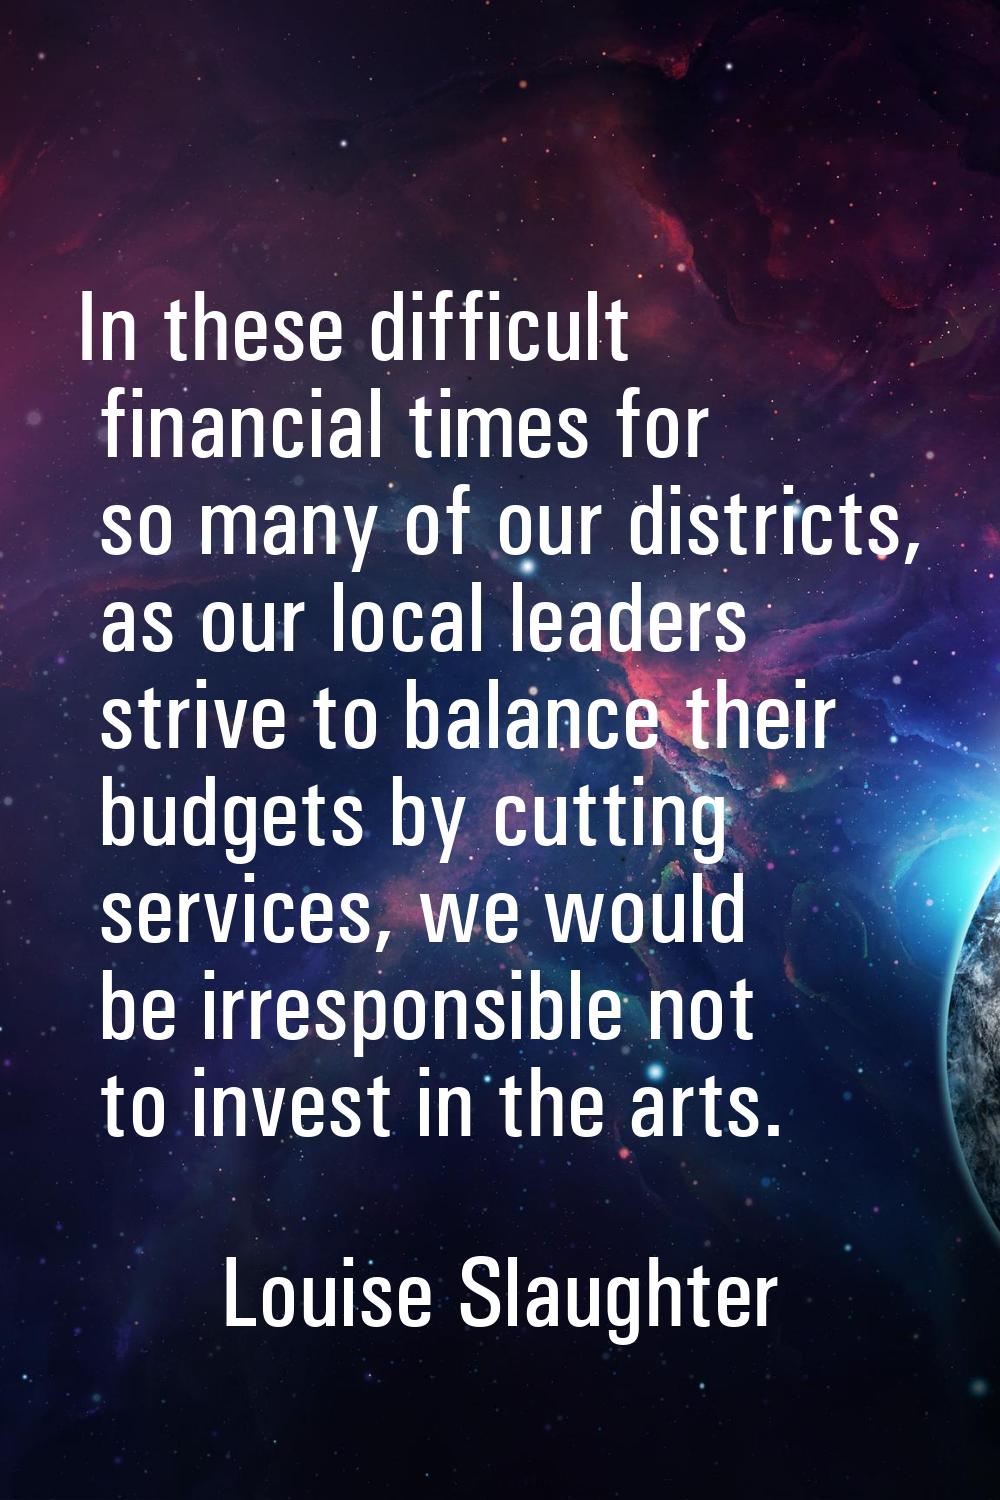 In these difficult financial times for so many of our districts, as our local leaders strive to bal